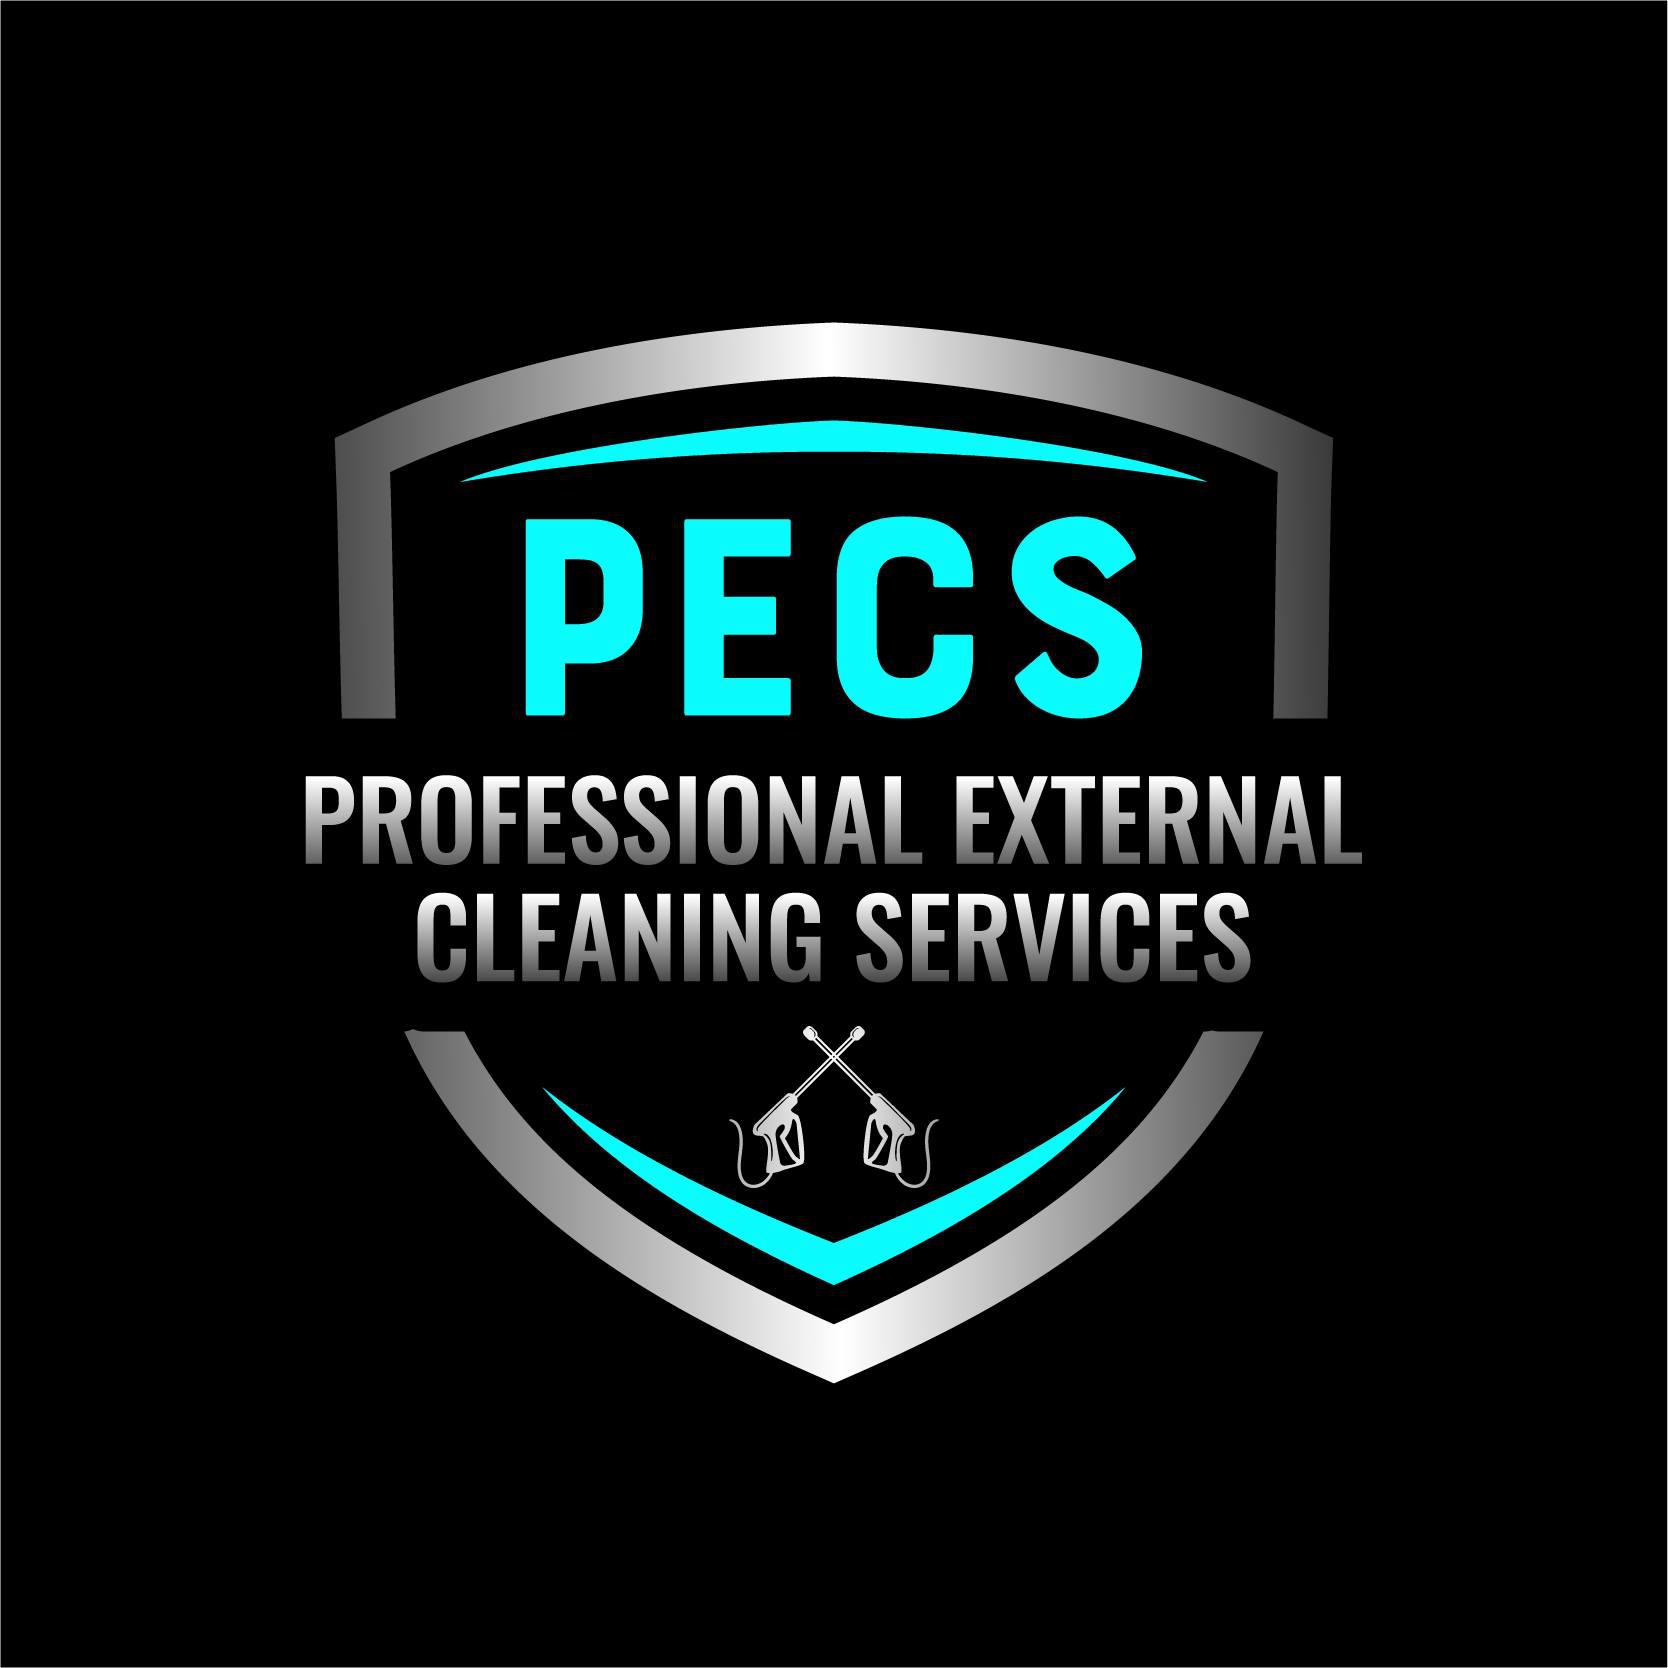 PECS Professional External Cleaning Services - Morpeth, Northumberland - 07754 023061 | ShowMeLocal.com